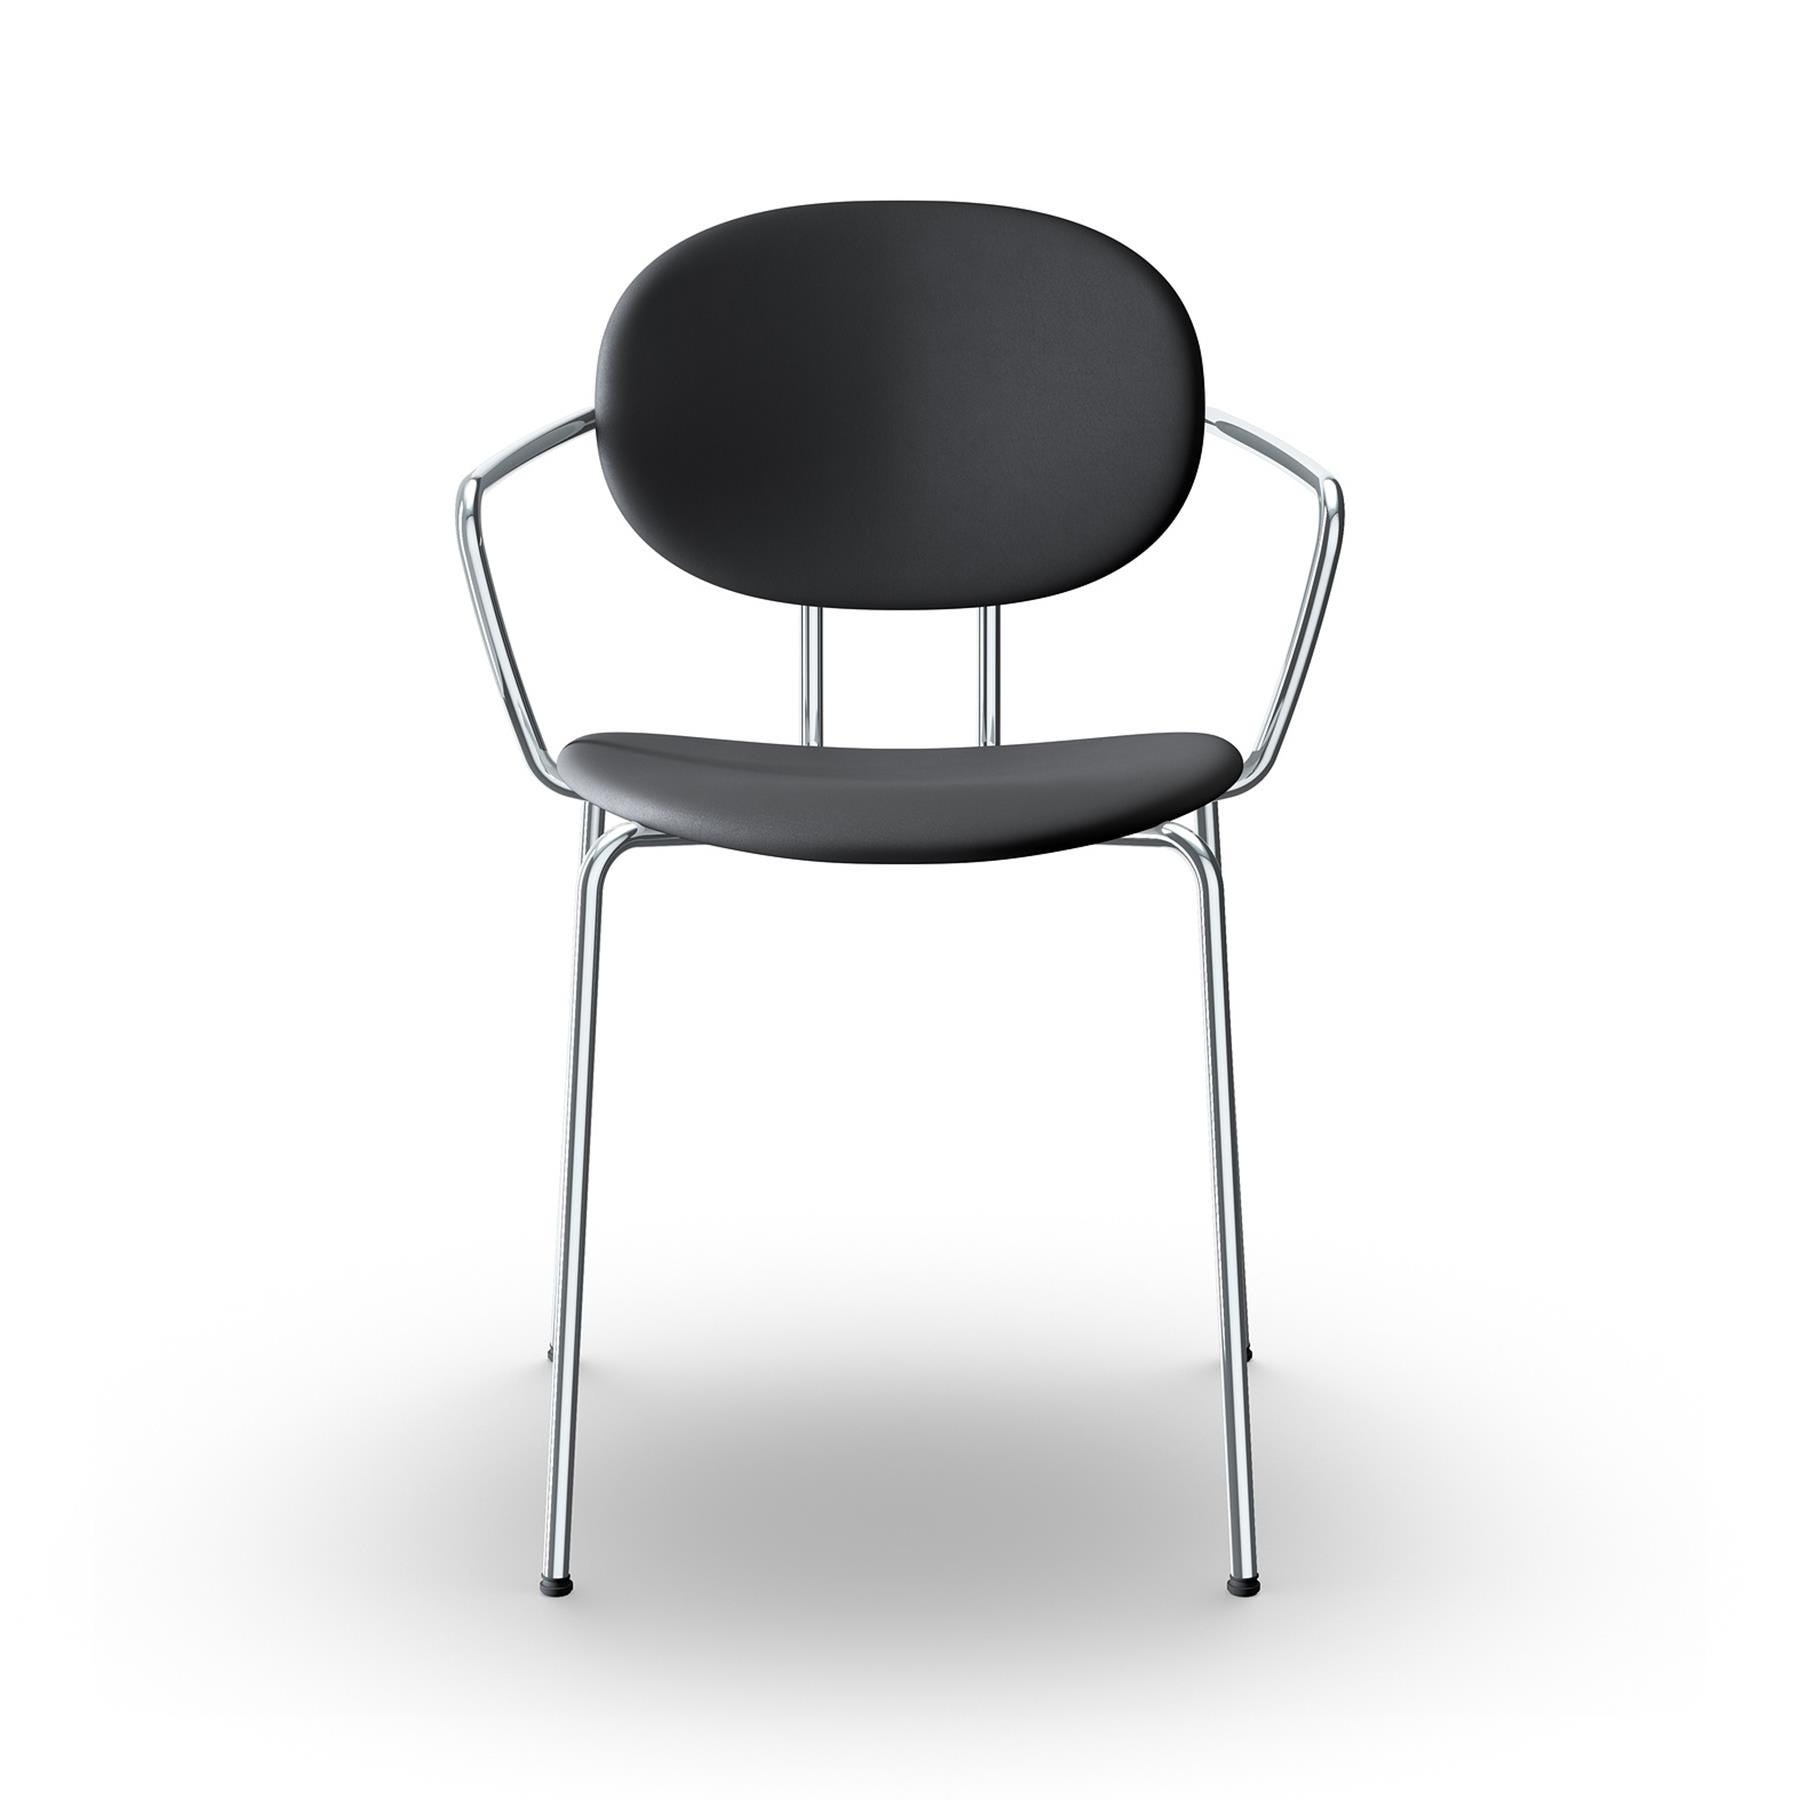 Sibast Piet Hein Dining Chair Fully Upholstered With Arms Chrome Nevada Black Designer Furniture From Holloways Of Ludlow